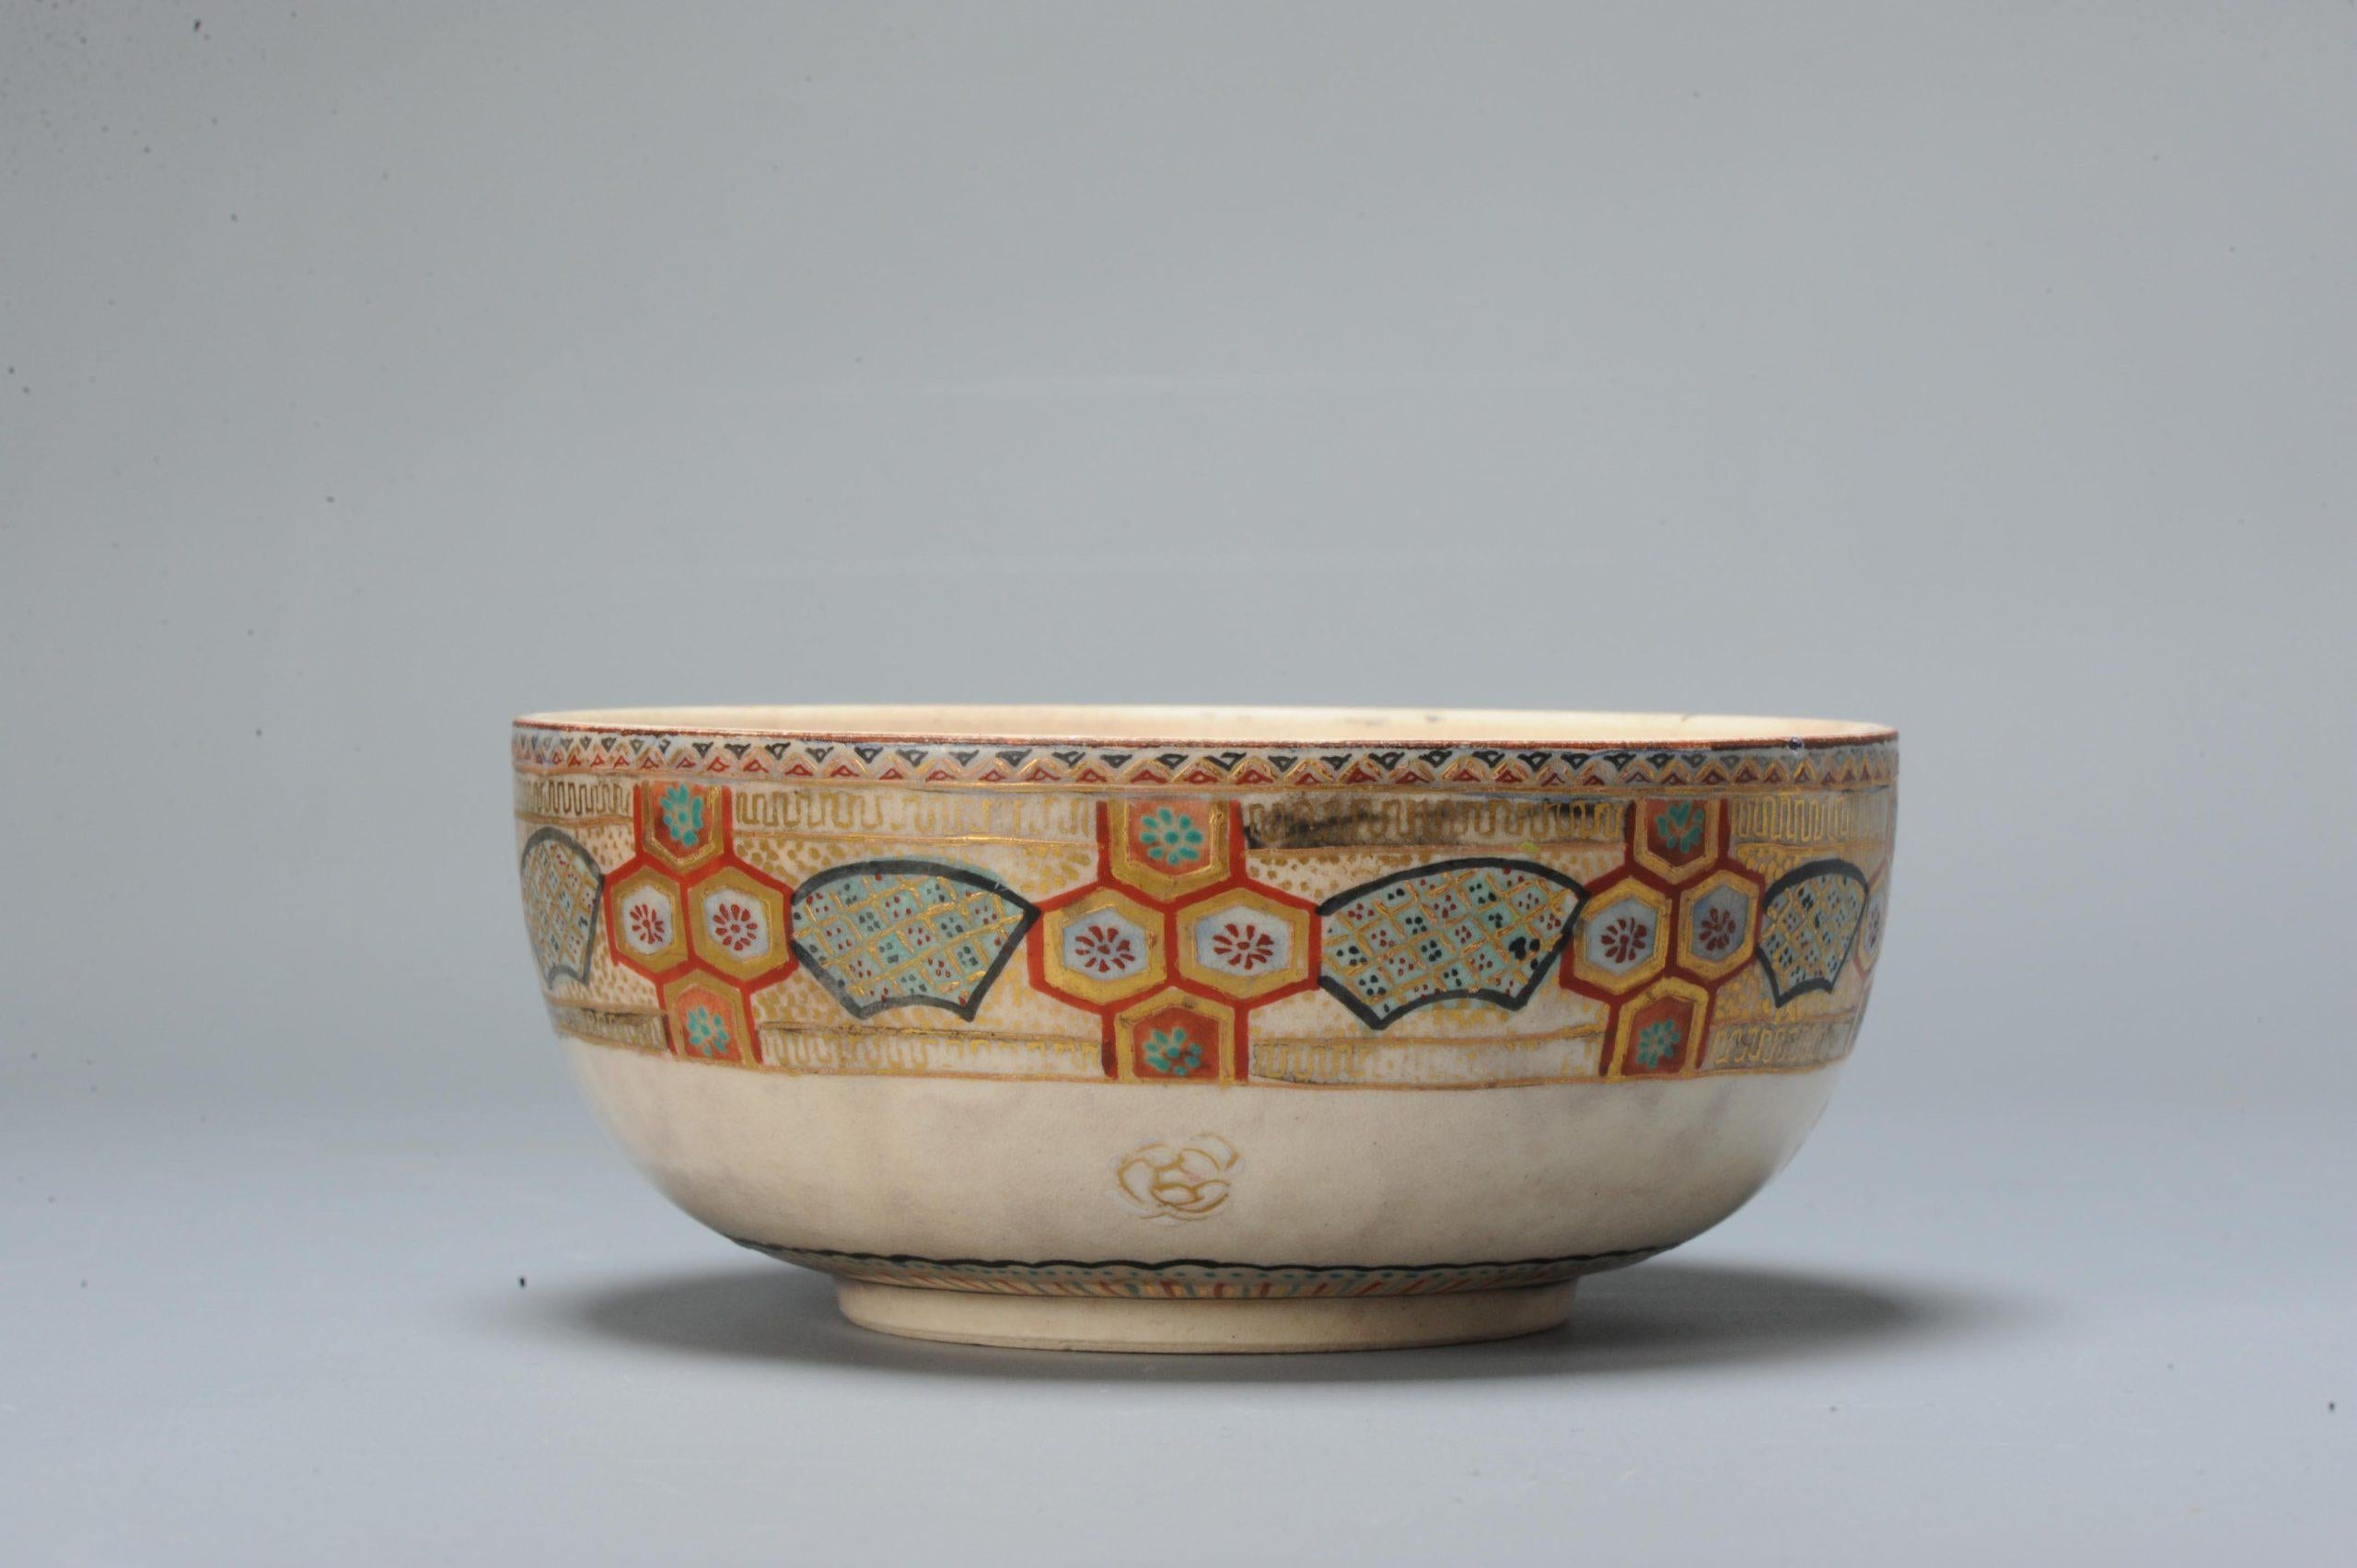 Faboulous and small japanese earthenware bowl.

The painting quality is absolutely amazing.

Unmarked at the base.

Additional information:
Material: Porcelain & Pottery
Japanese Style: Satsuma
Region of Origin: Japan
Period: 19th century, 20th